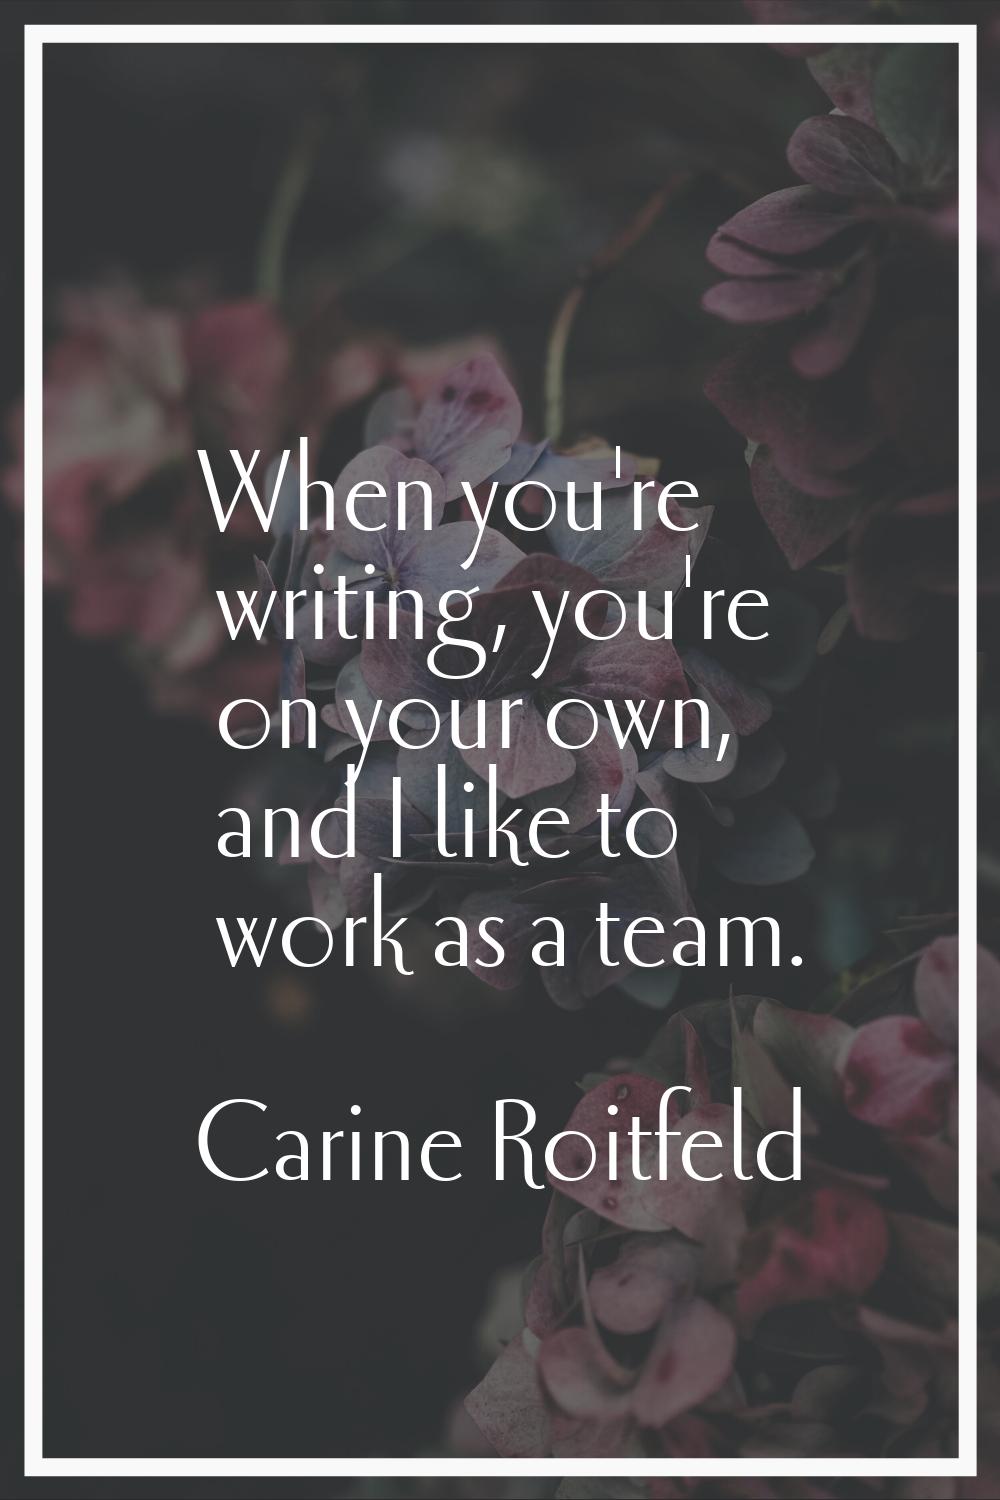 When you're writing, you're on your own, and I like to work as a team.